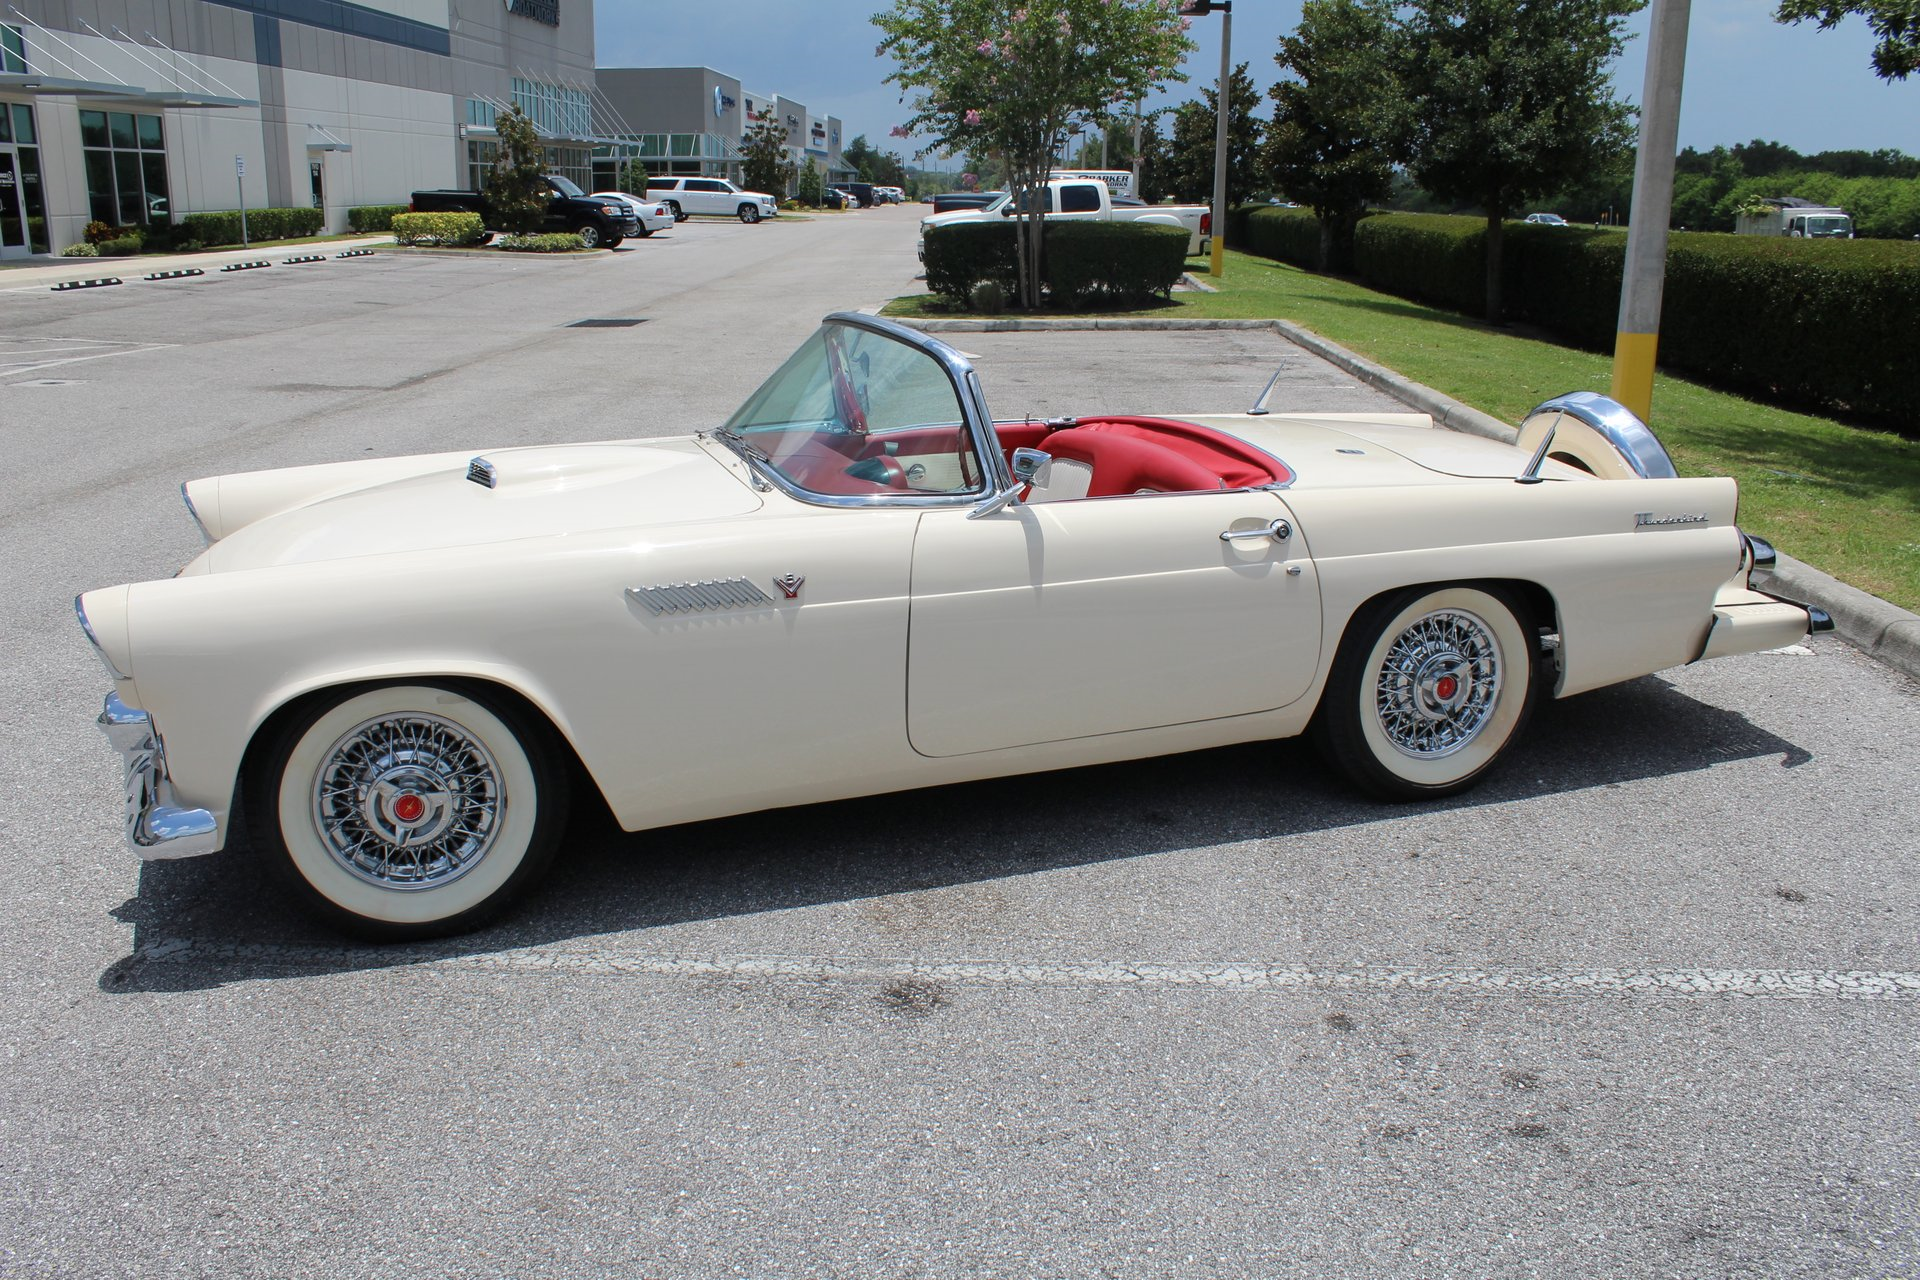 Car Of The Day: 1955 Ford Thunderbird